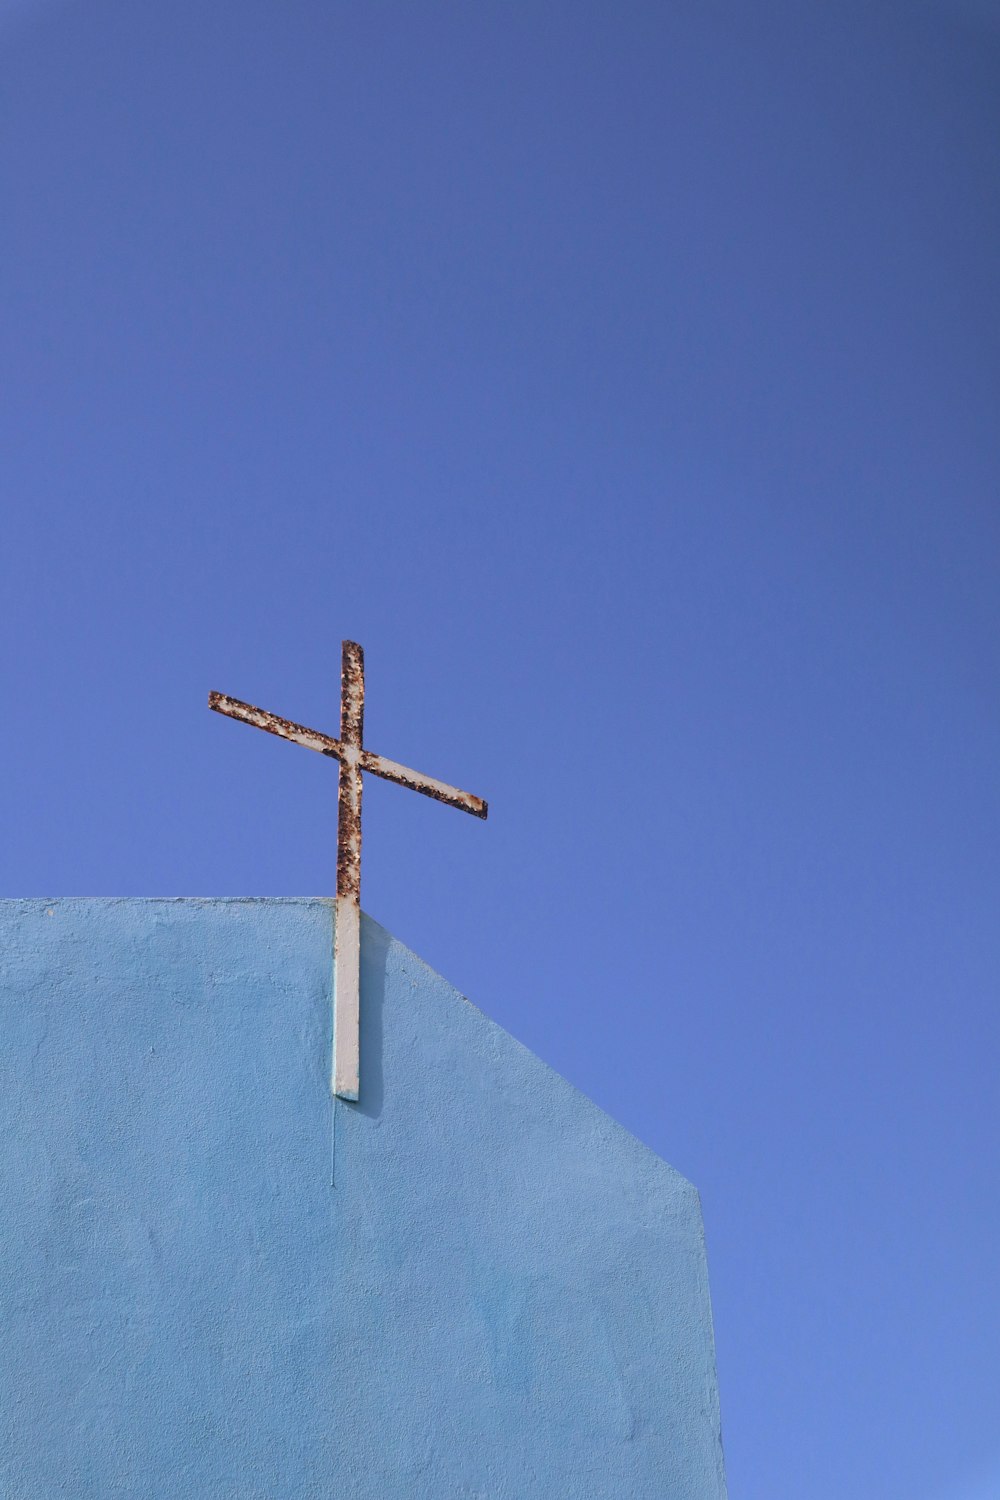 brown wooden cross on white textile under blue sky during daytime